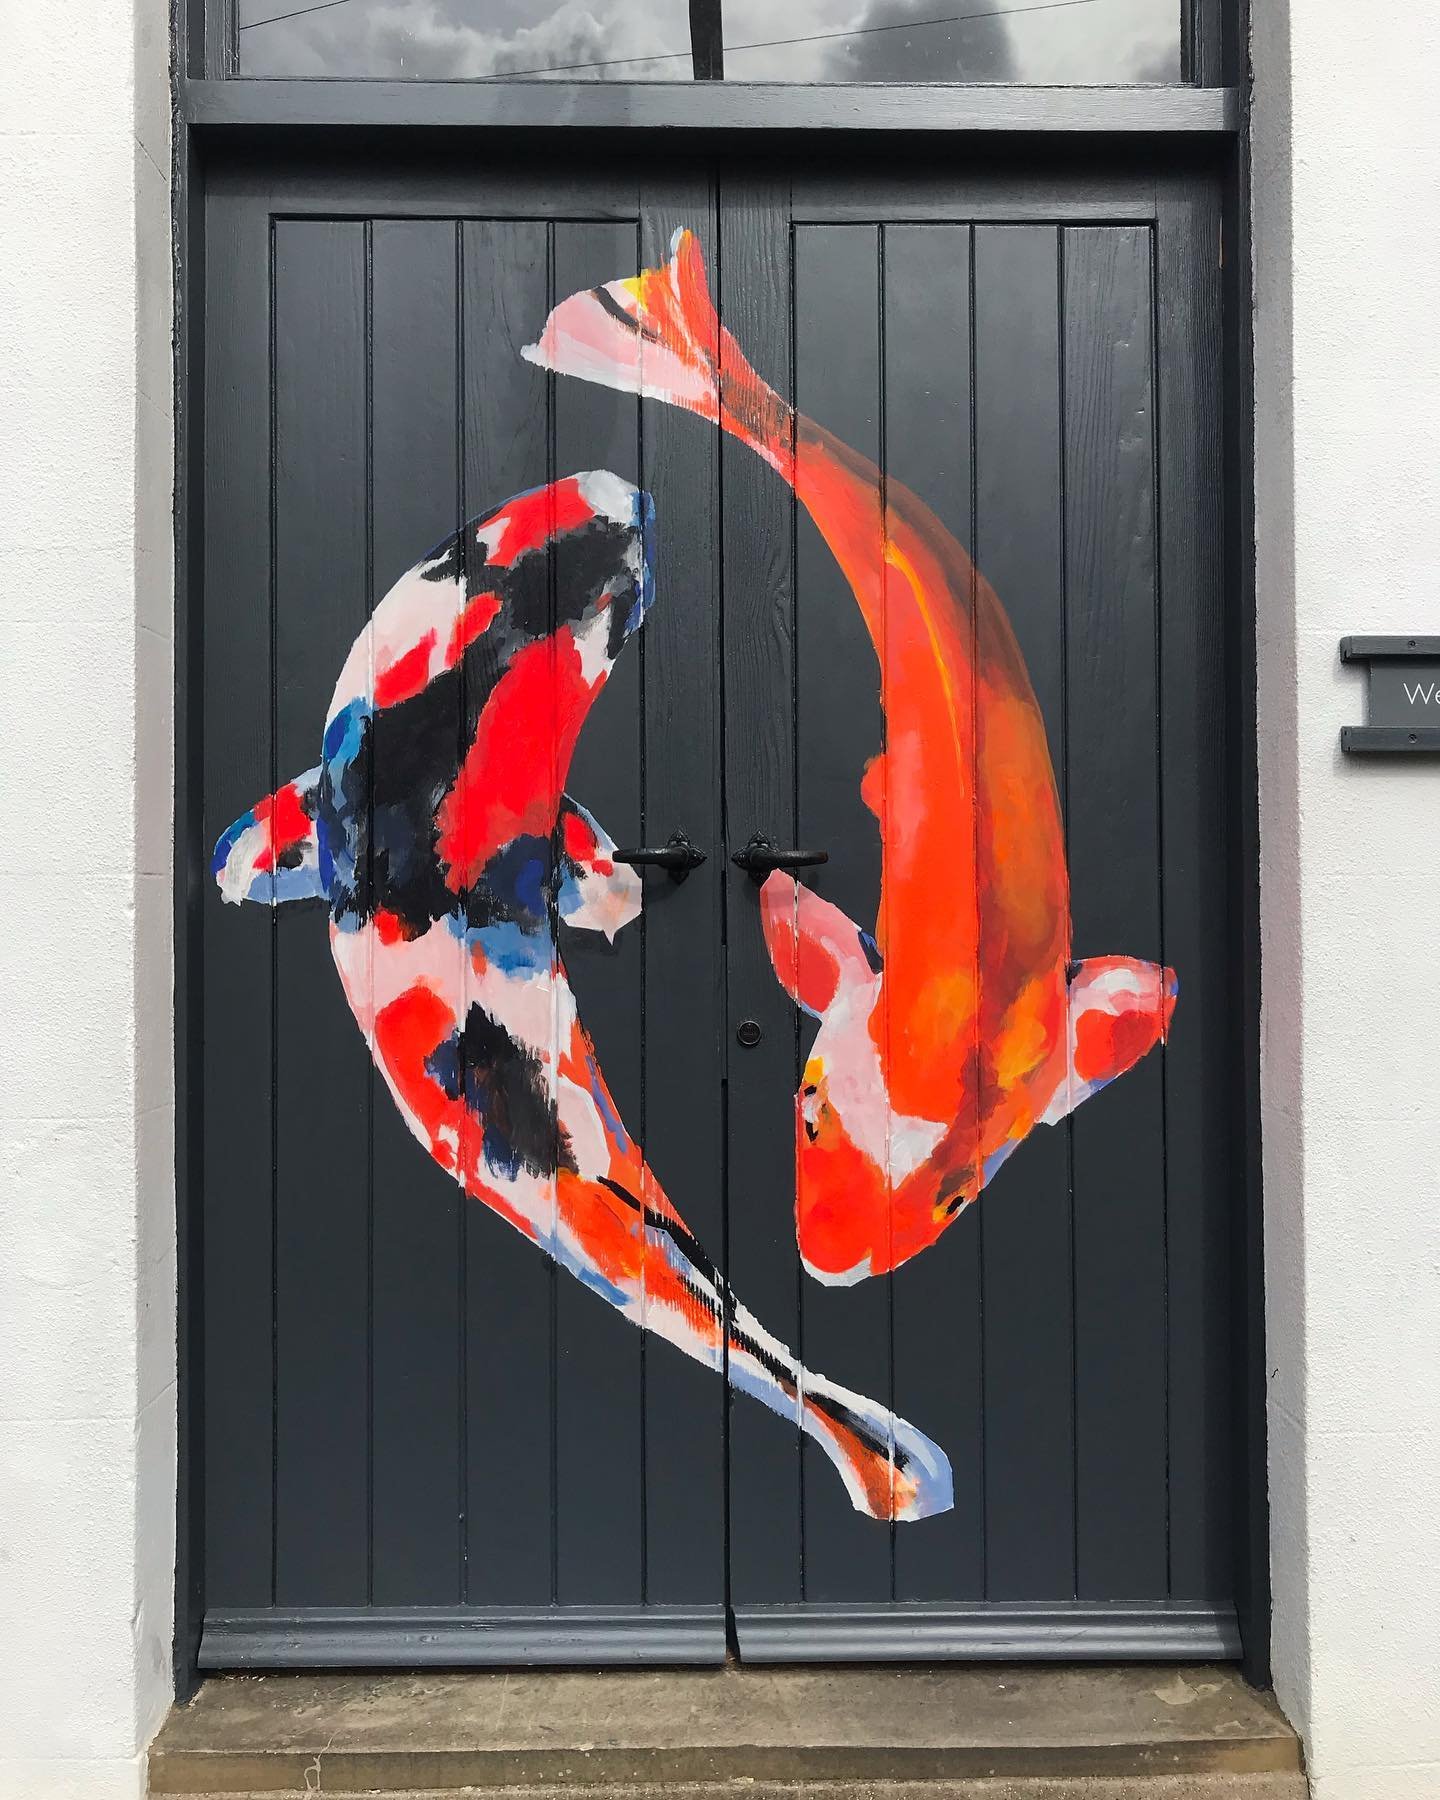 Koi Pair in a Yin Yang composition, I painted on the doors of The Chapel in Denne Road in Horsham over the weekend. In preparation for the @horshamartists Art Trail 2024, 22-23 and 29-30 June. 13 venues and 45 artists, spread around the Horsham Distr